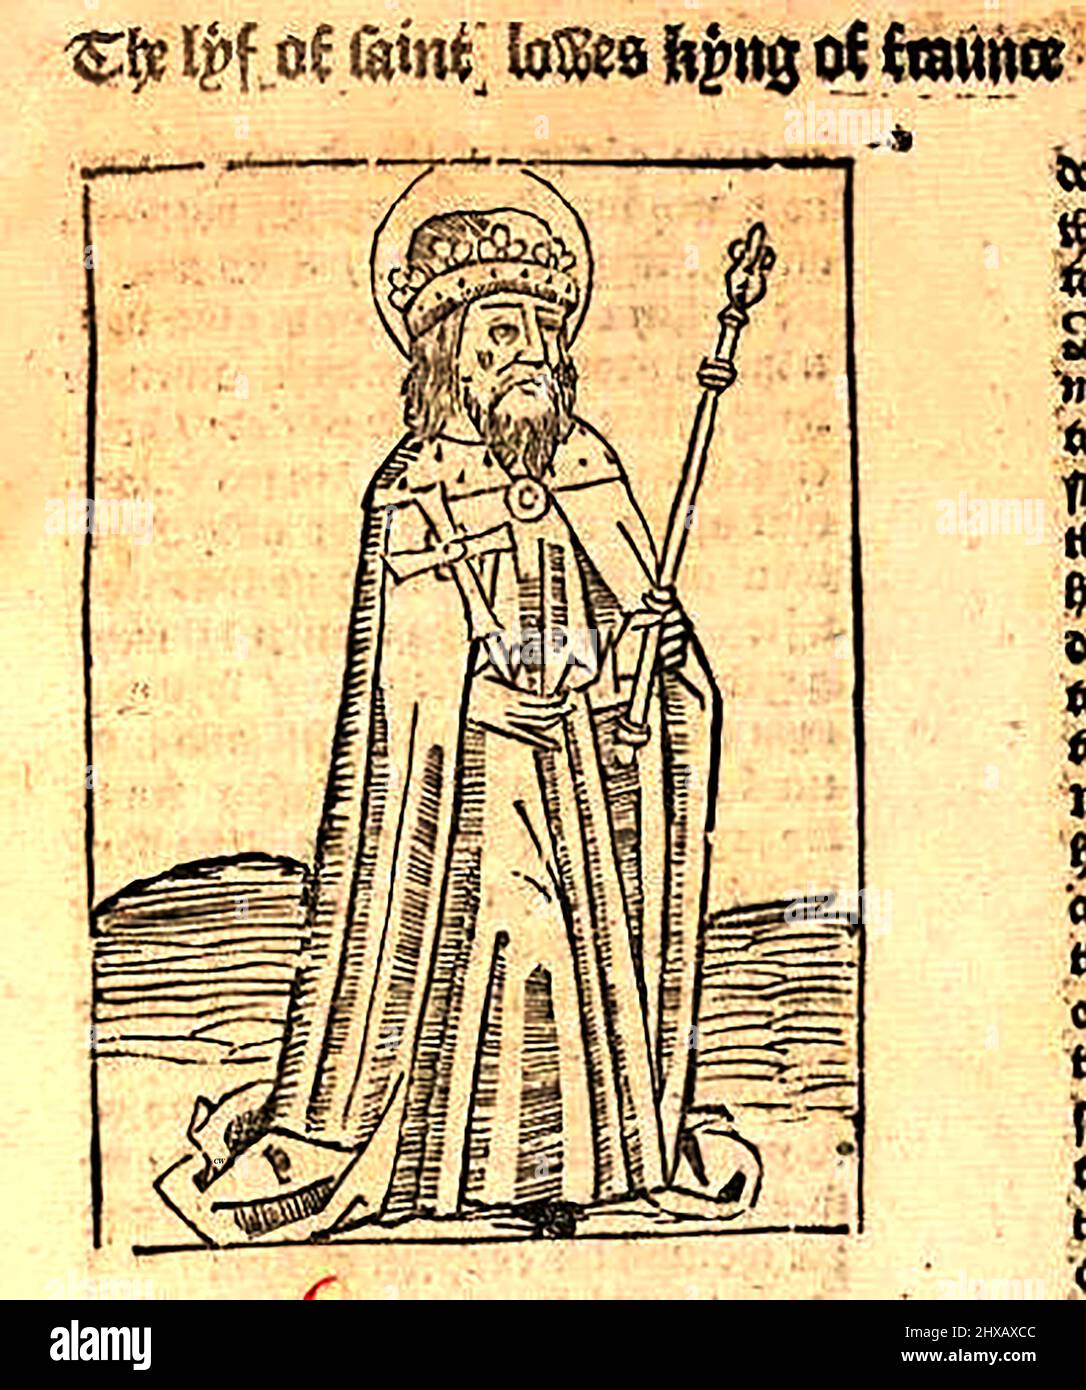 15th century woodcut showing Saint Lewis / Louis of France (King) as printed by William Caxton ( 1422-1491/92) in his translation of  'The Golden Legend' or  'Thus endeth the legende named in Latyn legenda aurea that is to saye in Englysshe the golden legende' by Jacobus, de Voragine, (Circa 1229-1298). Stock Photo